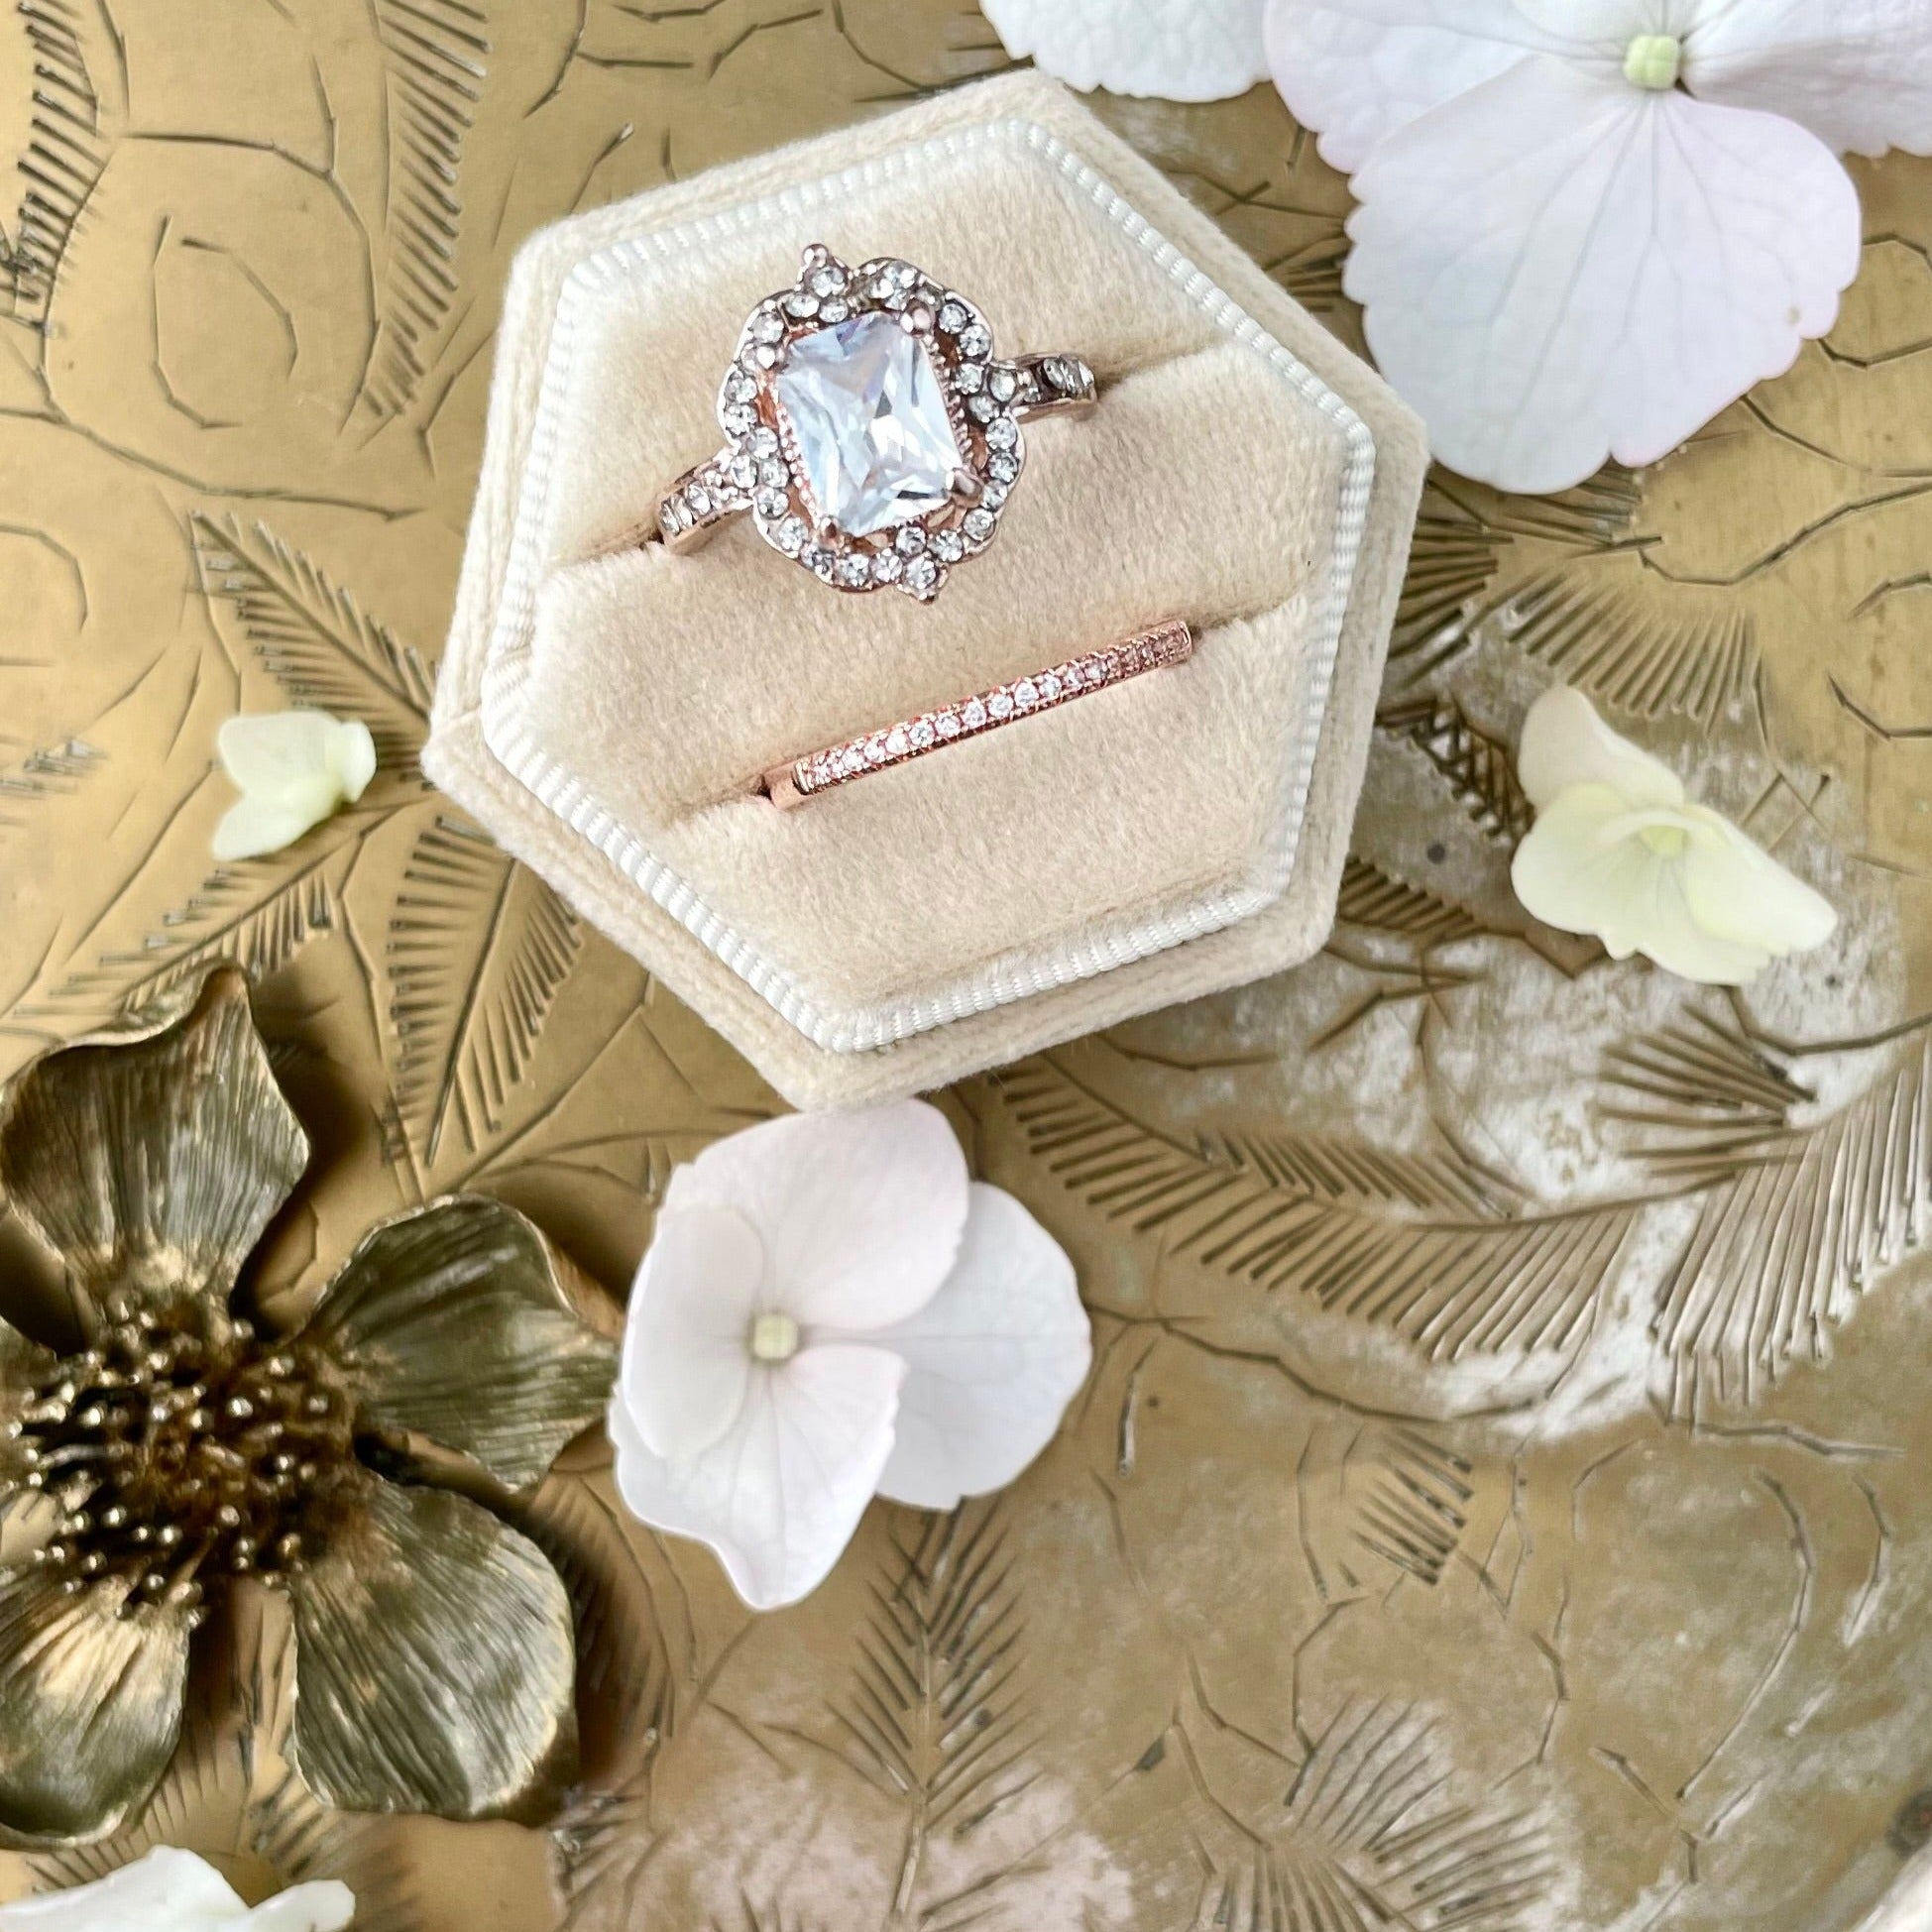 Tan velvet ring box with white florals and one metal styling flower - Flat lay props from Champagne & GRIT